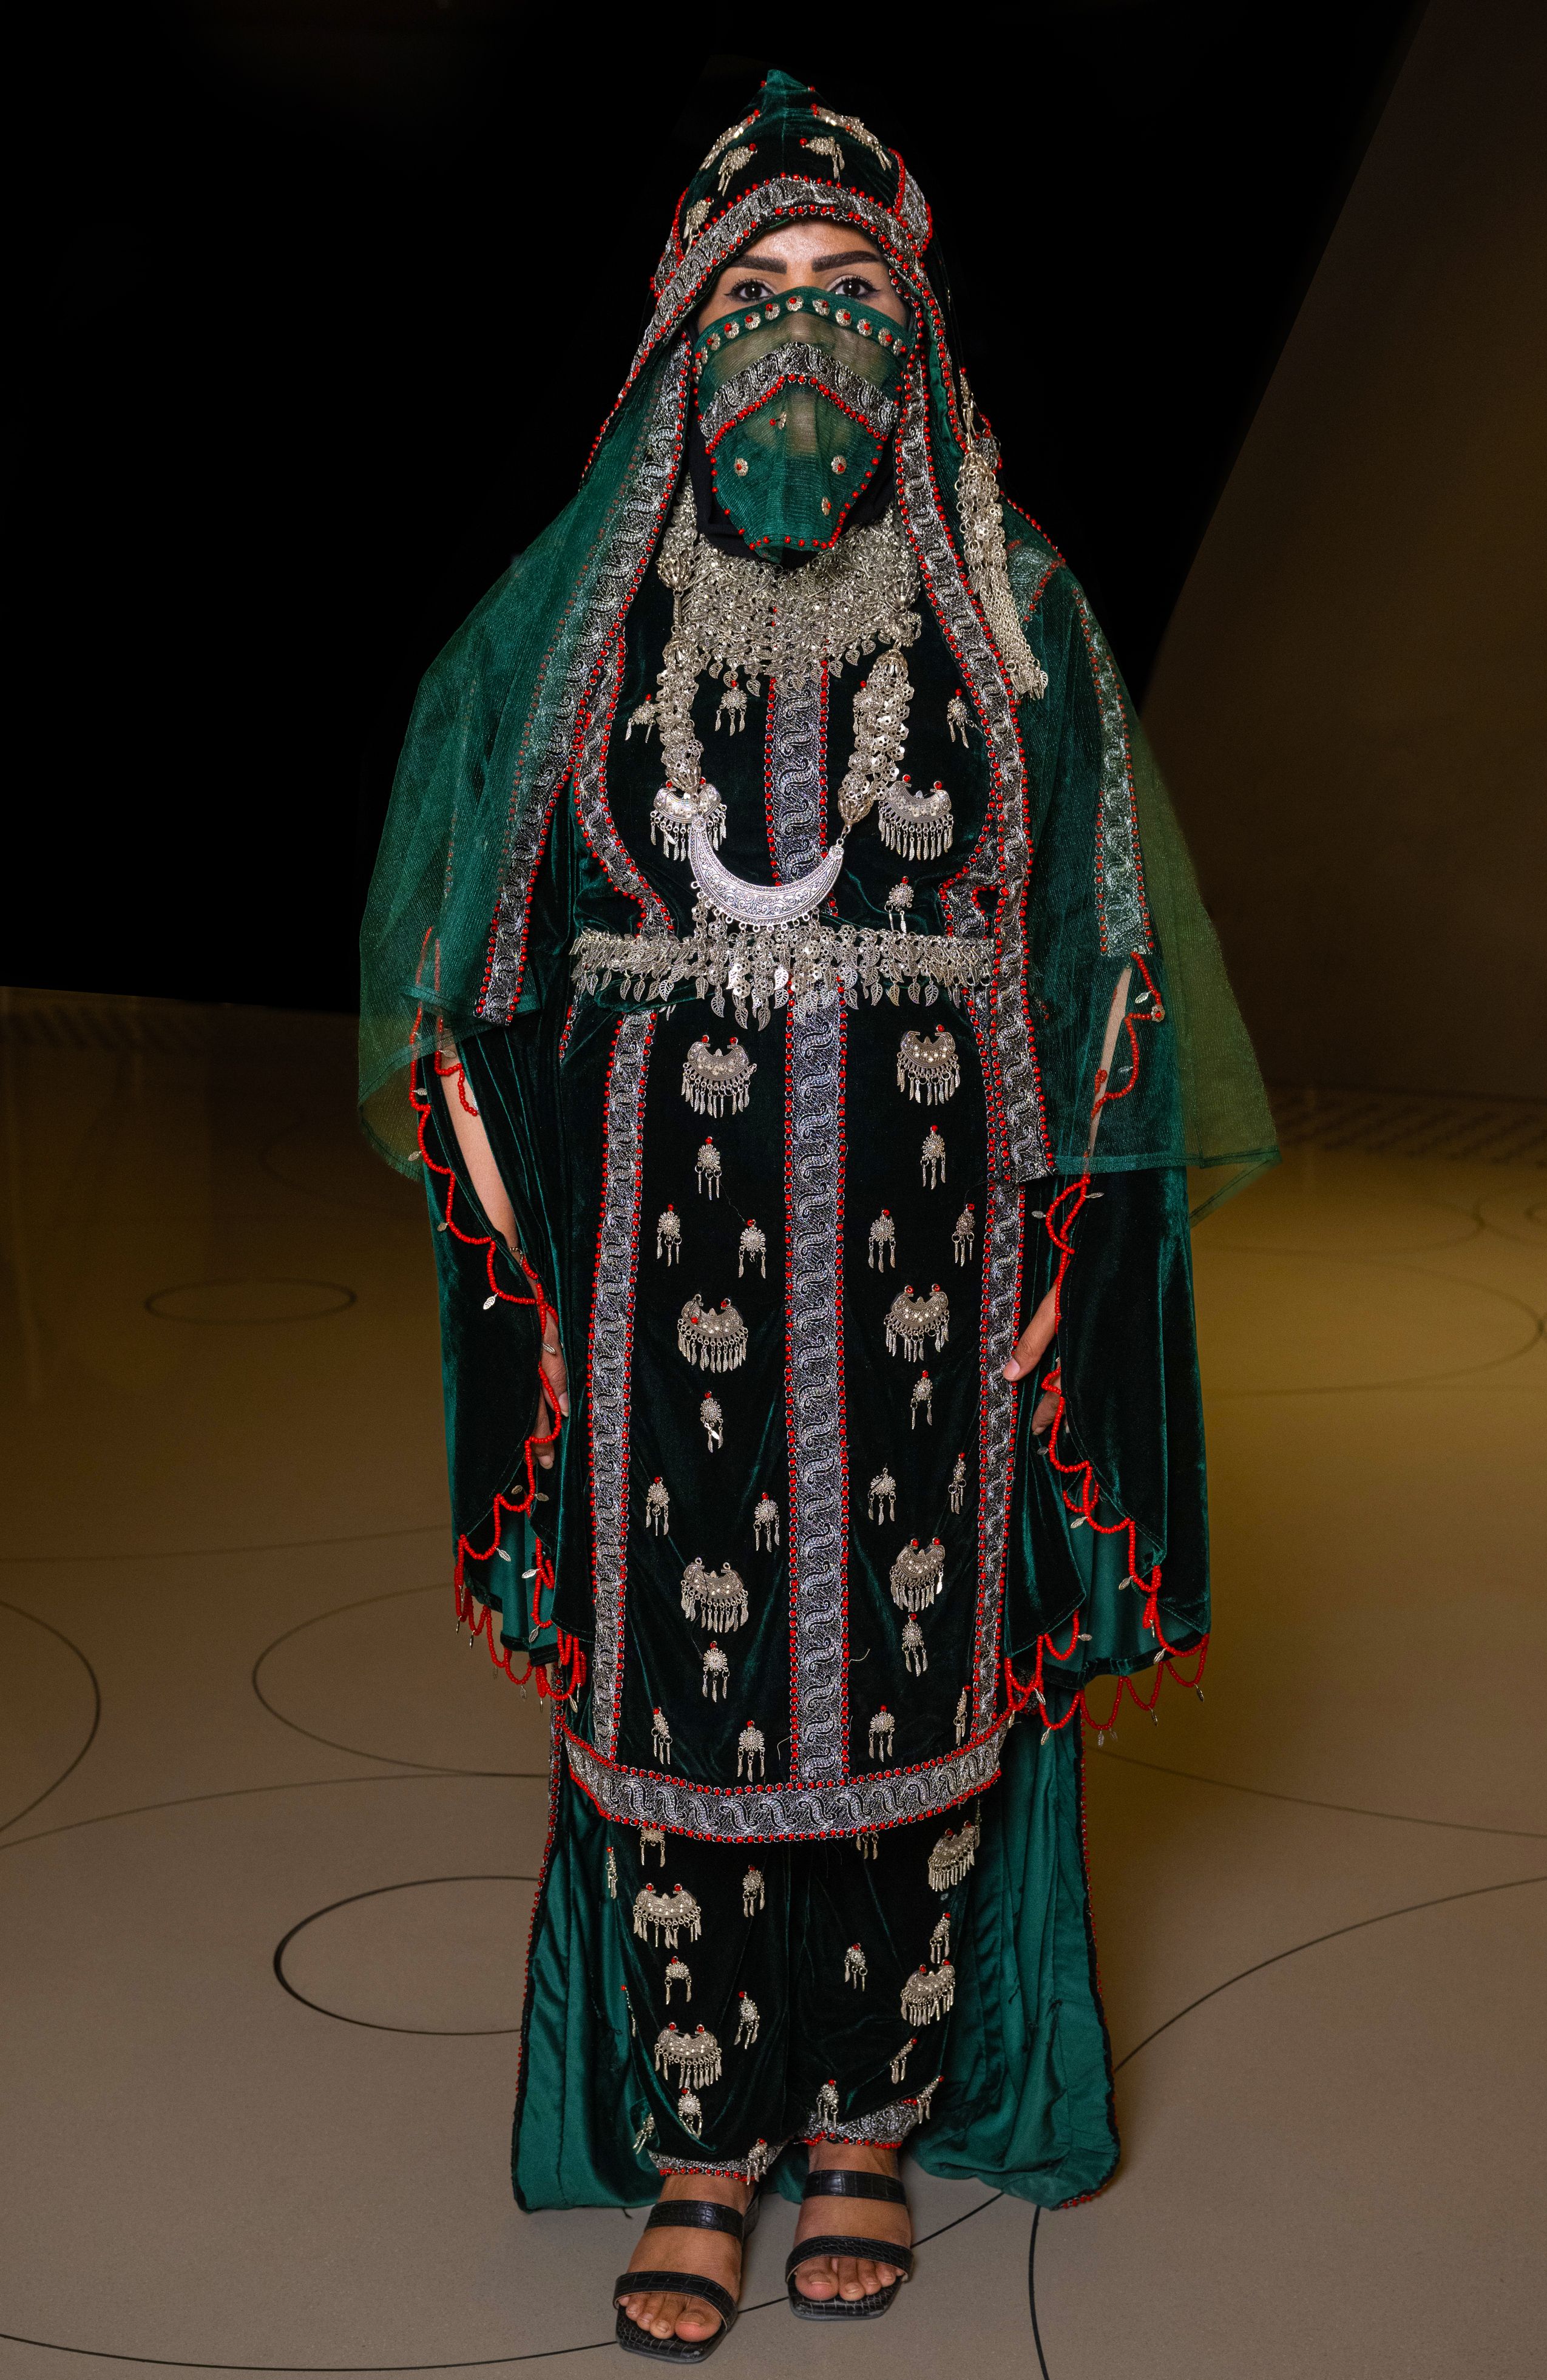 Woman wears a green velvet dress embellished with silver and coral and a head covering traditionally worn in Yemen.